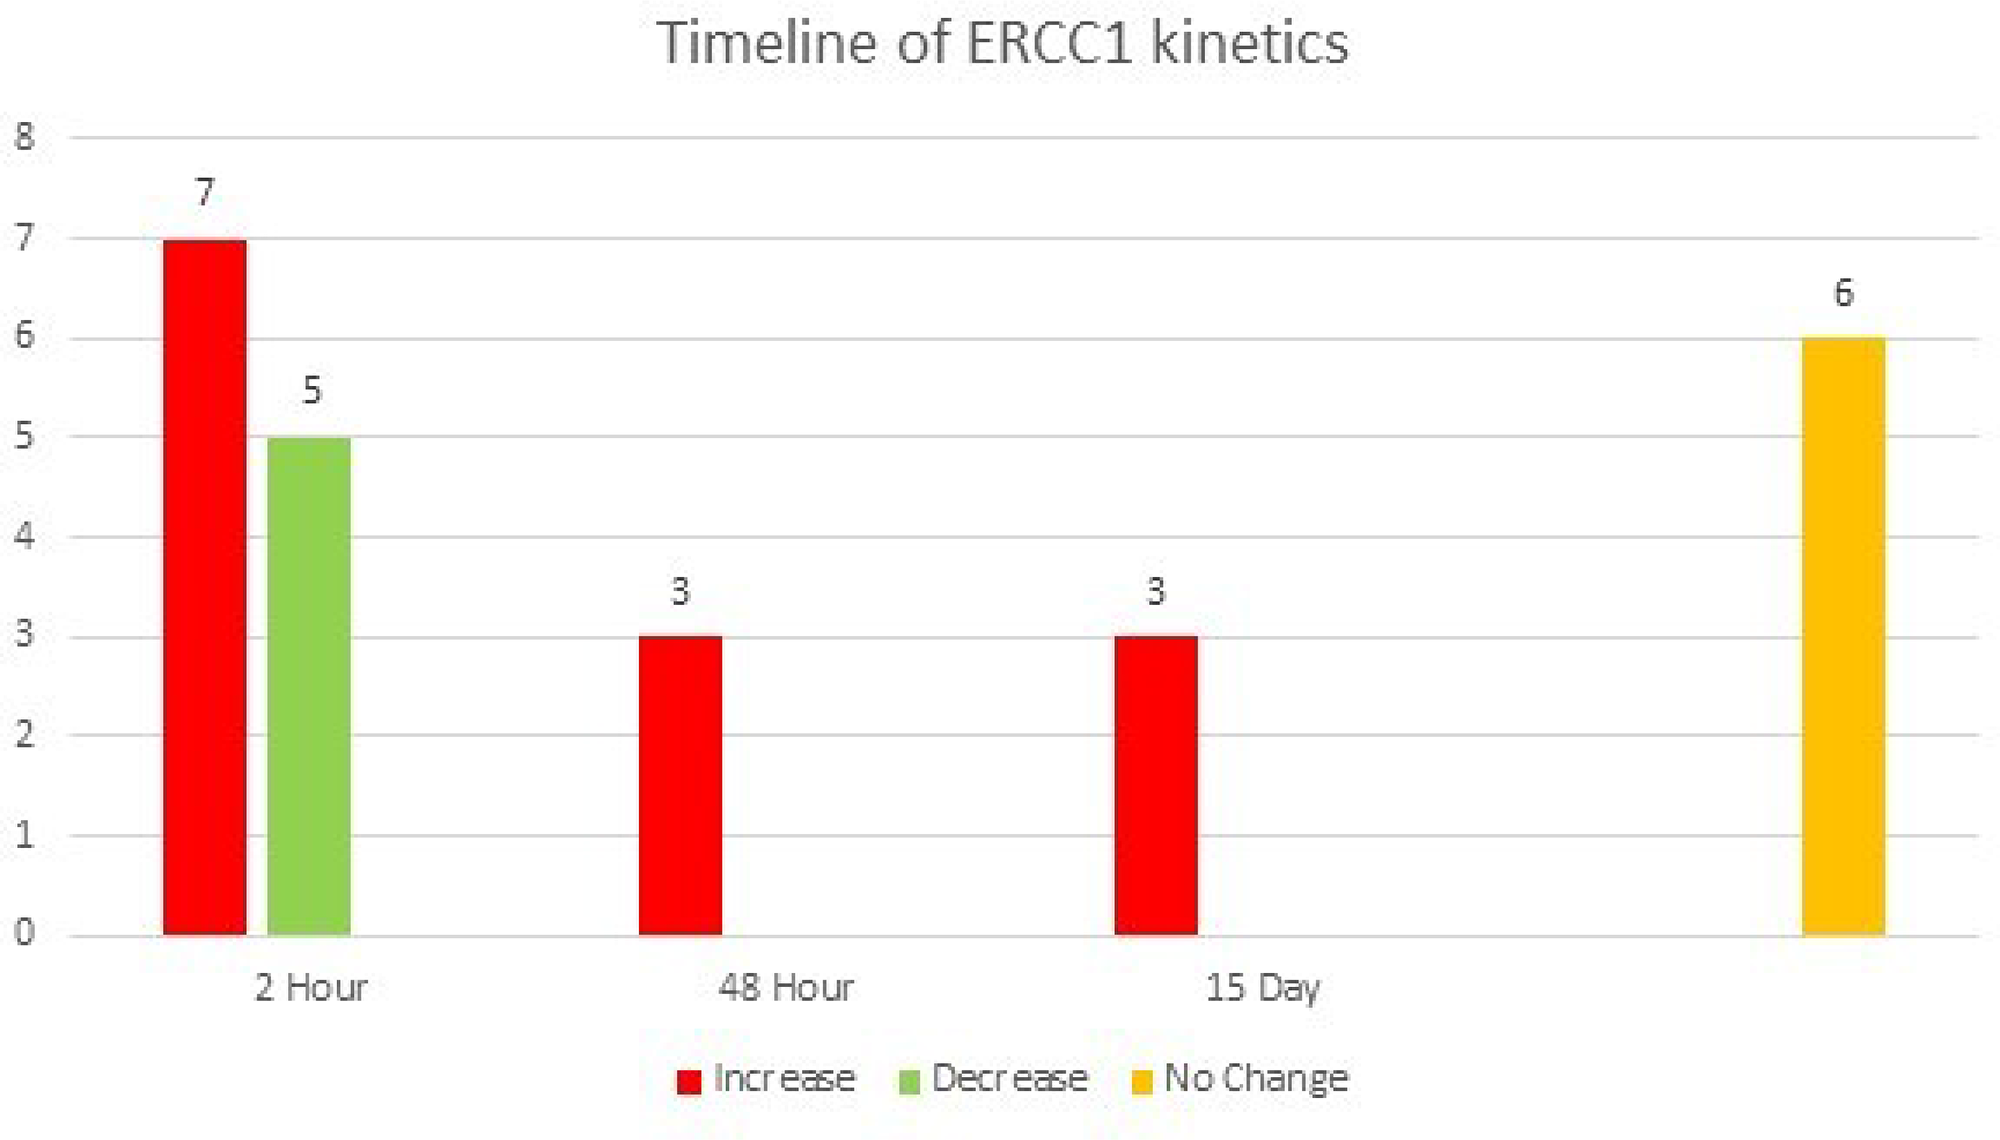 A graphical representation of the ERCC1 kinetics in patients with mCRC over time.